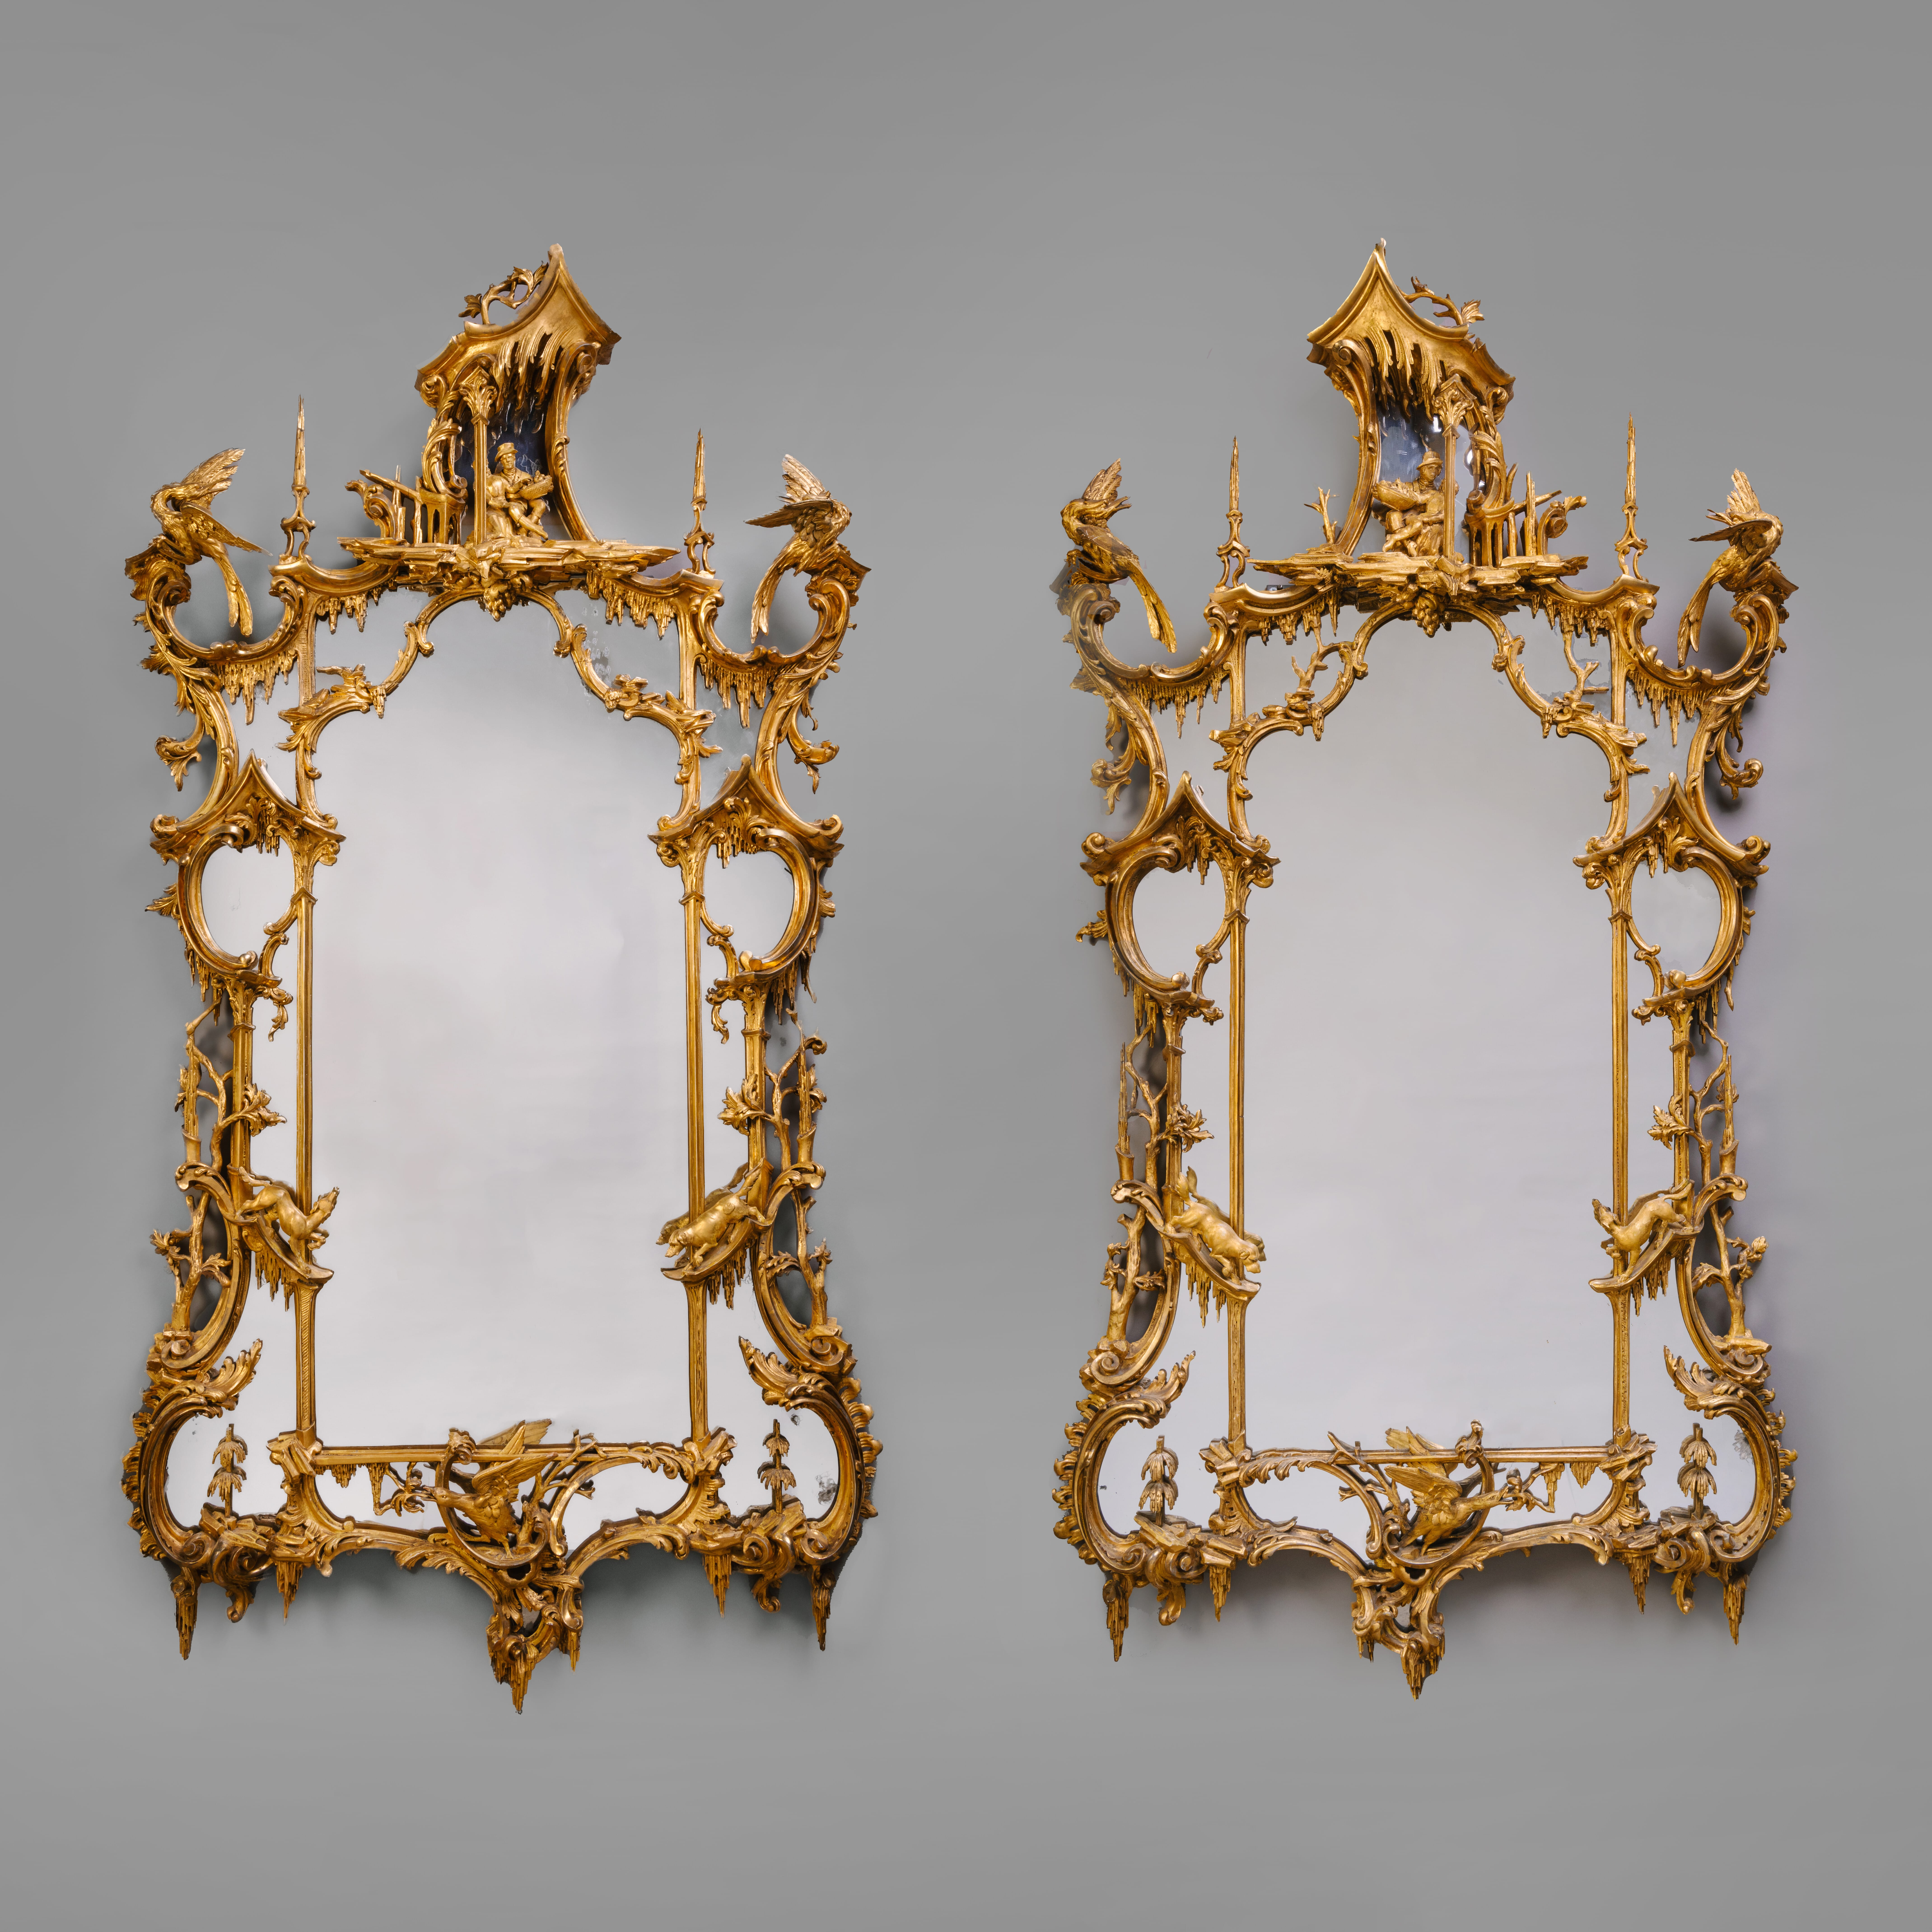 Pair of George II Style English Carved Giltwood ‘Rococo’ Wall Mirrors